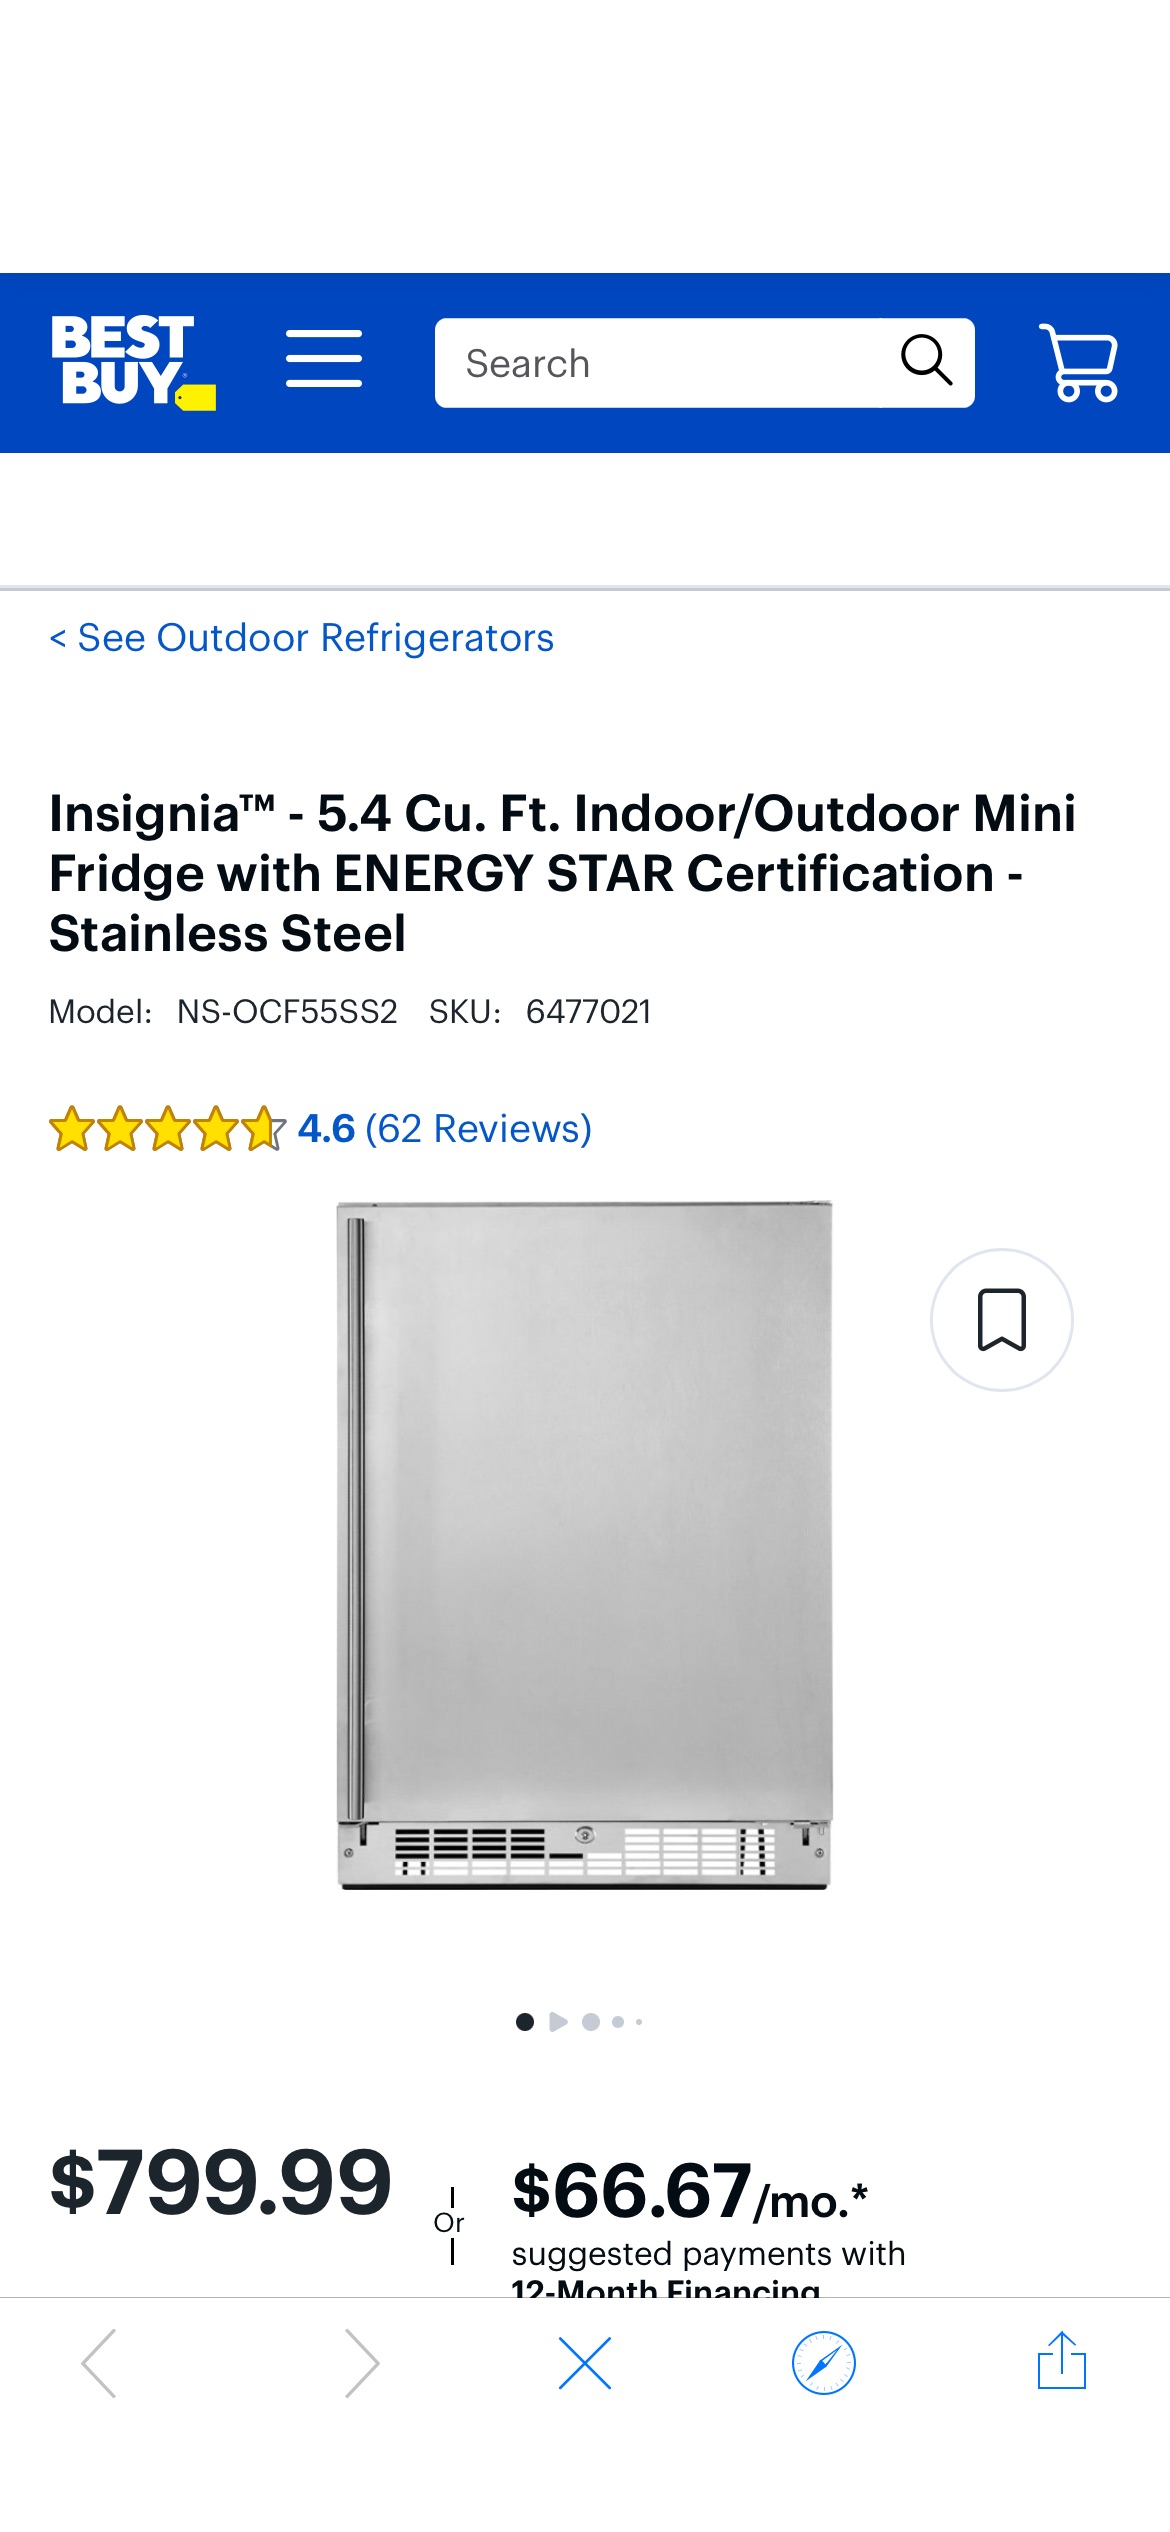 Insignia™ 5.4 Cu. Ft. Indoor/Outdoor Mini Fridge with ENERGY STAR Certification Stainless Steel NS-OCF55SS2 - Best Buy